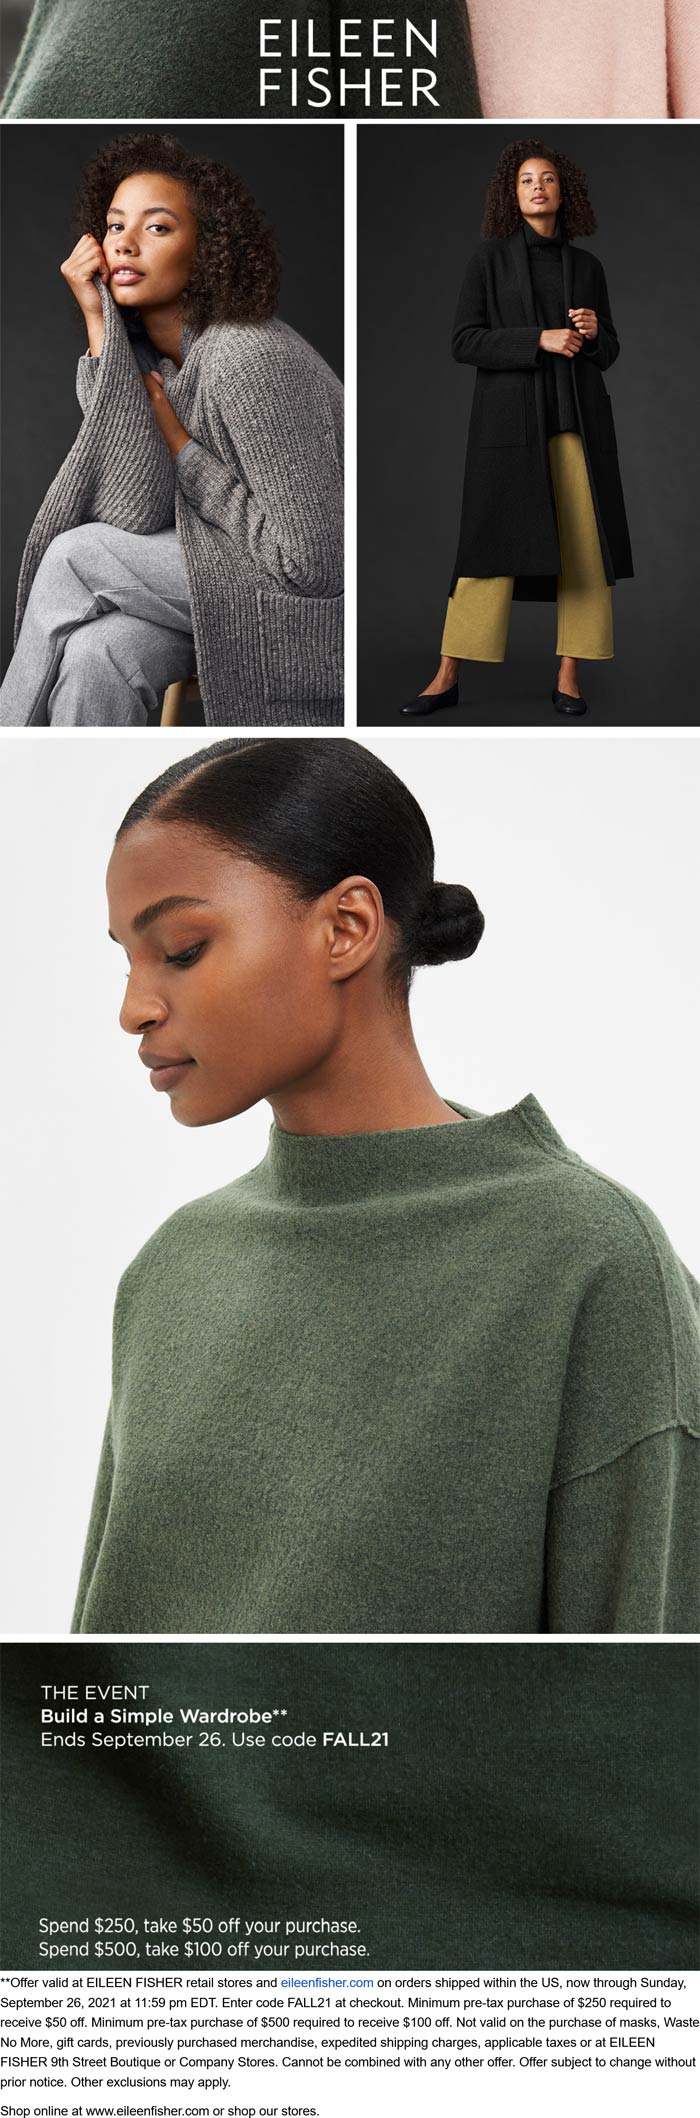 Eileen Fisher stores Coupon  $50-$100 off $250+ at Eileen Fisher via promo code FALL21 #eileenfisher 